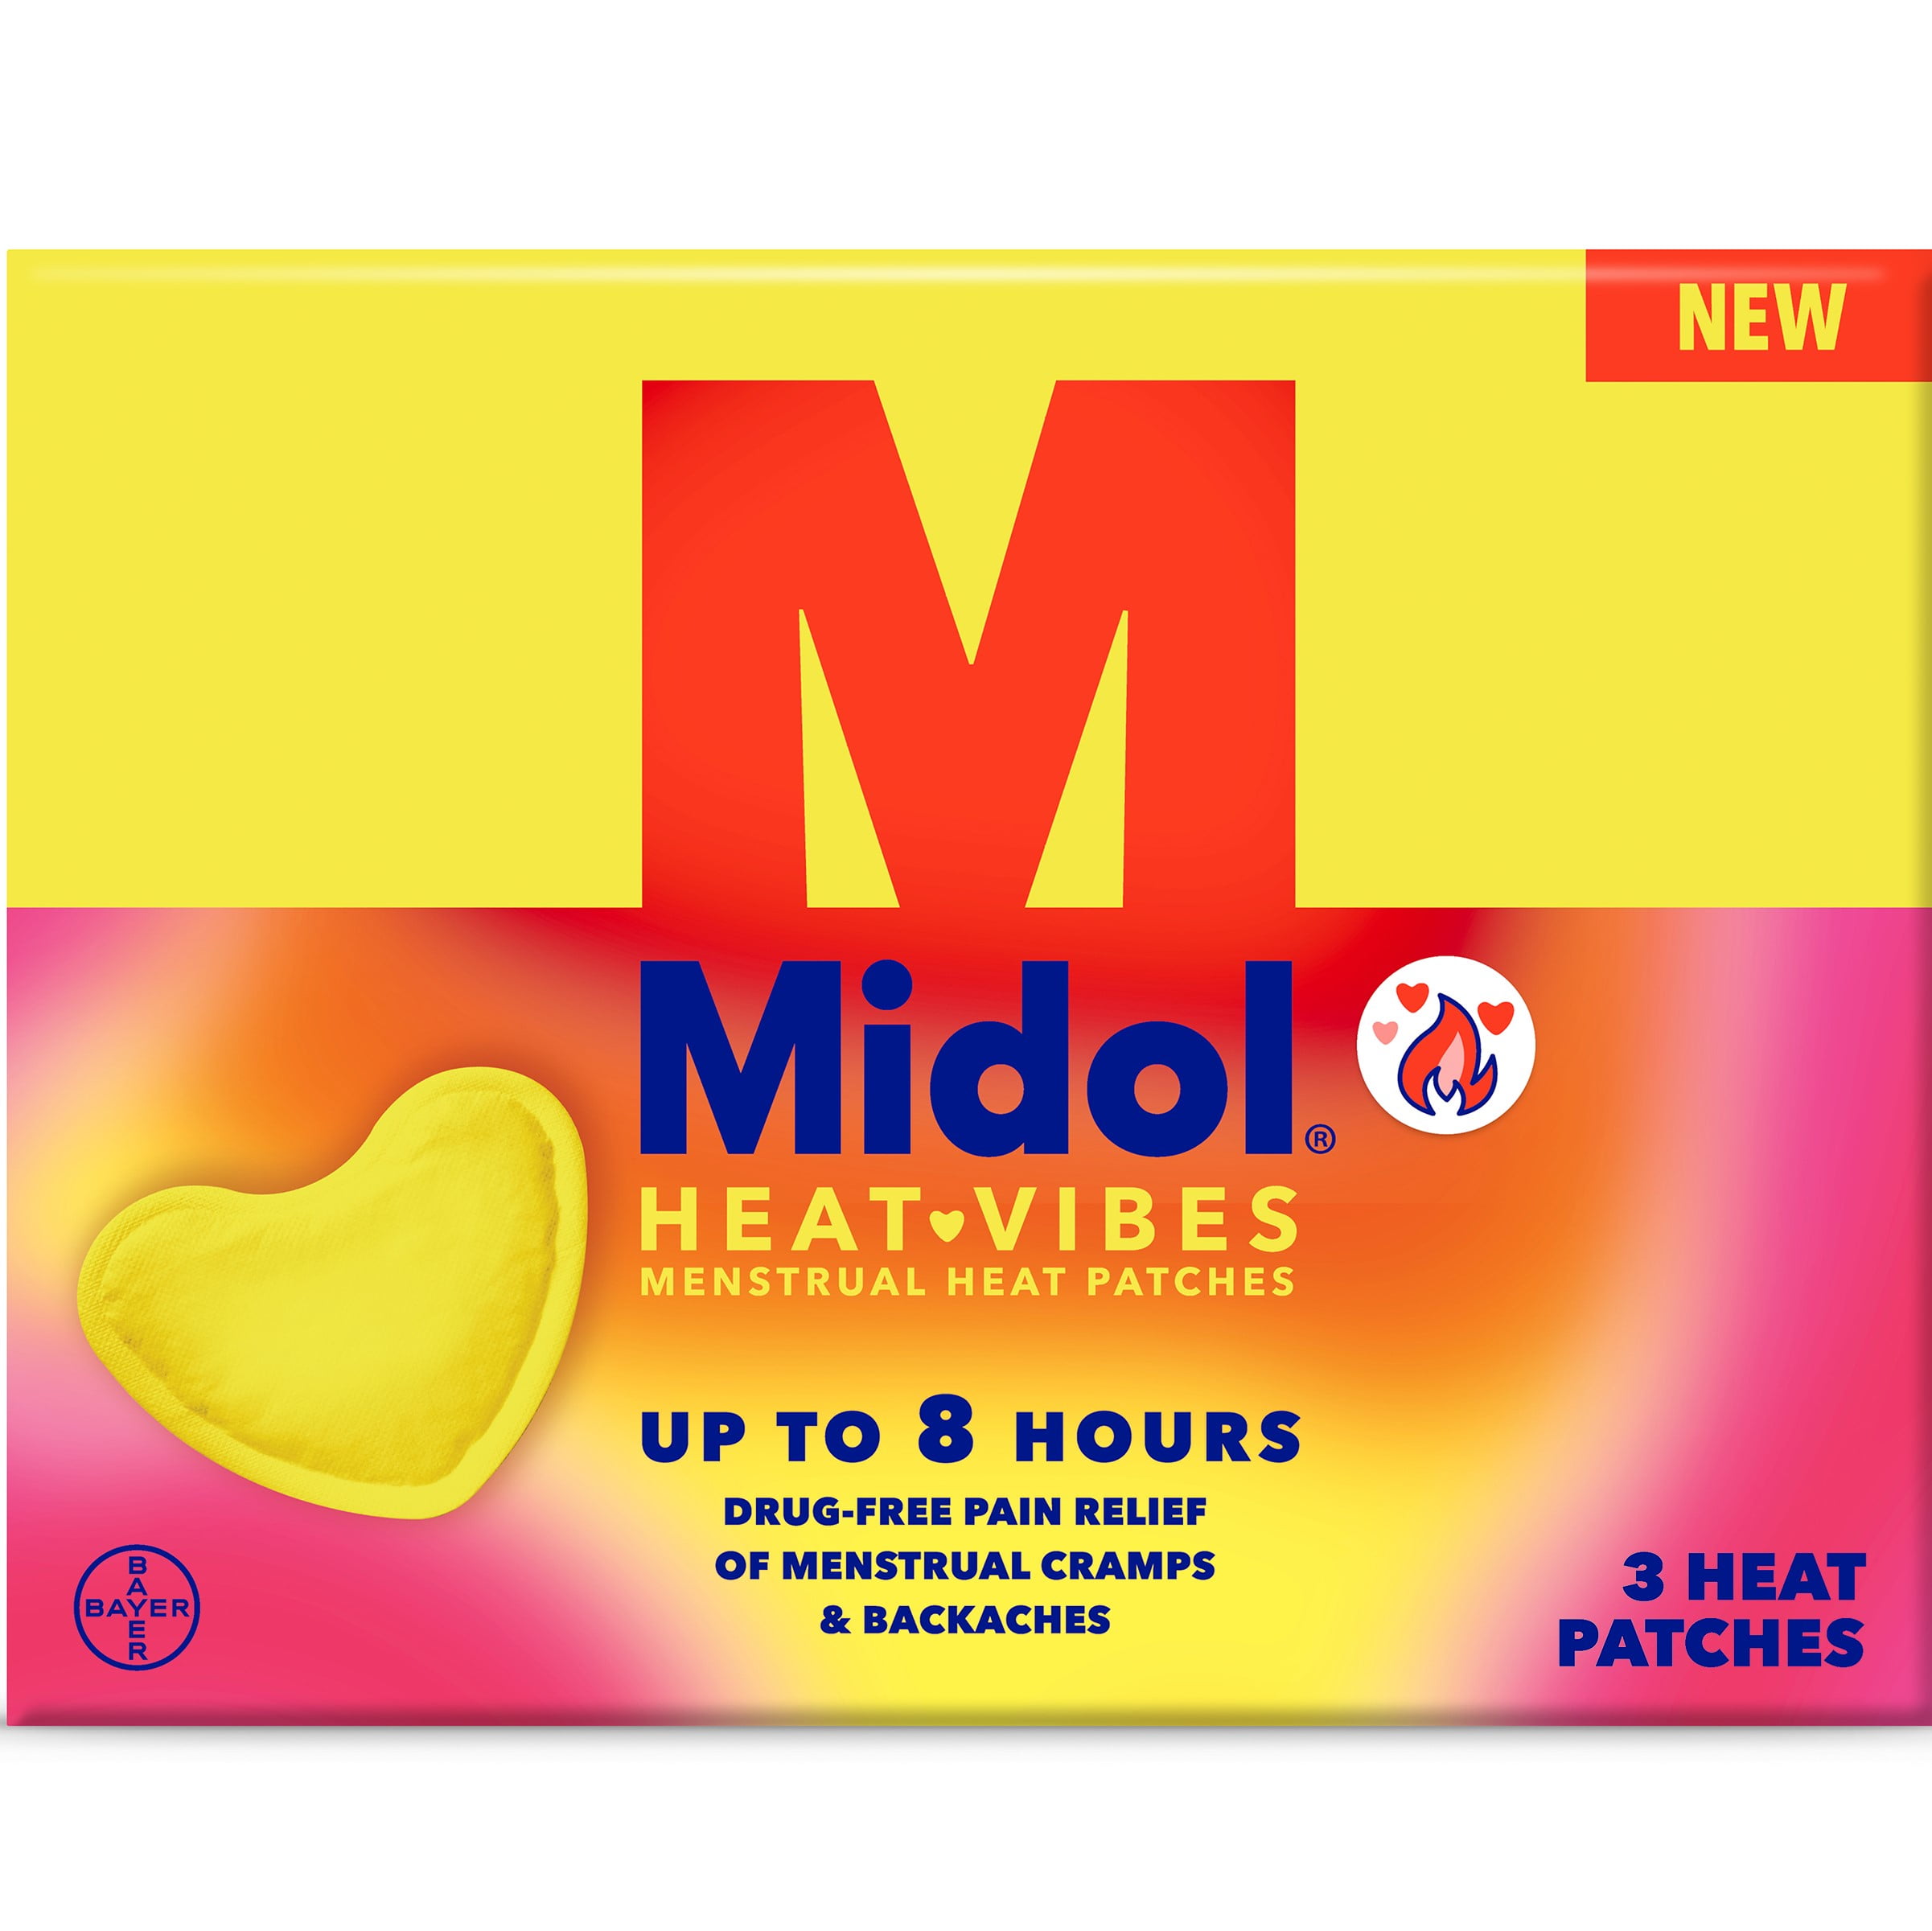 Midol Heat Vibes Long Lasting Therapeutic Pain Relief Patch, 3 Count